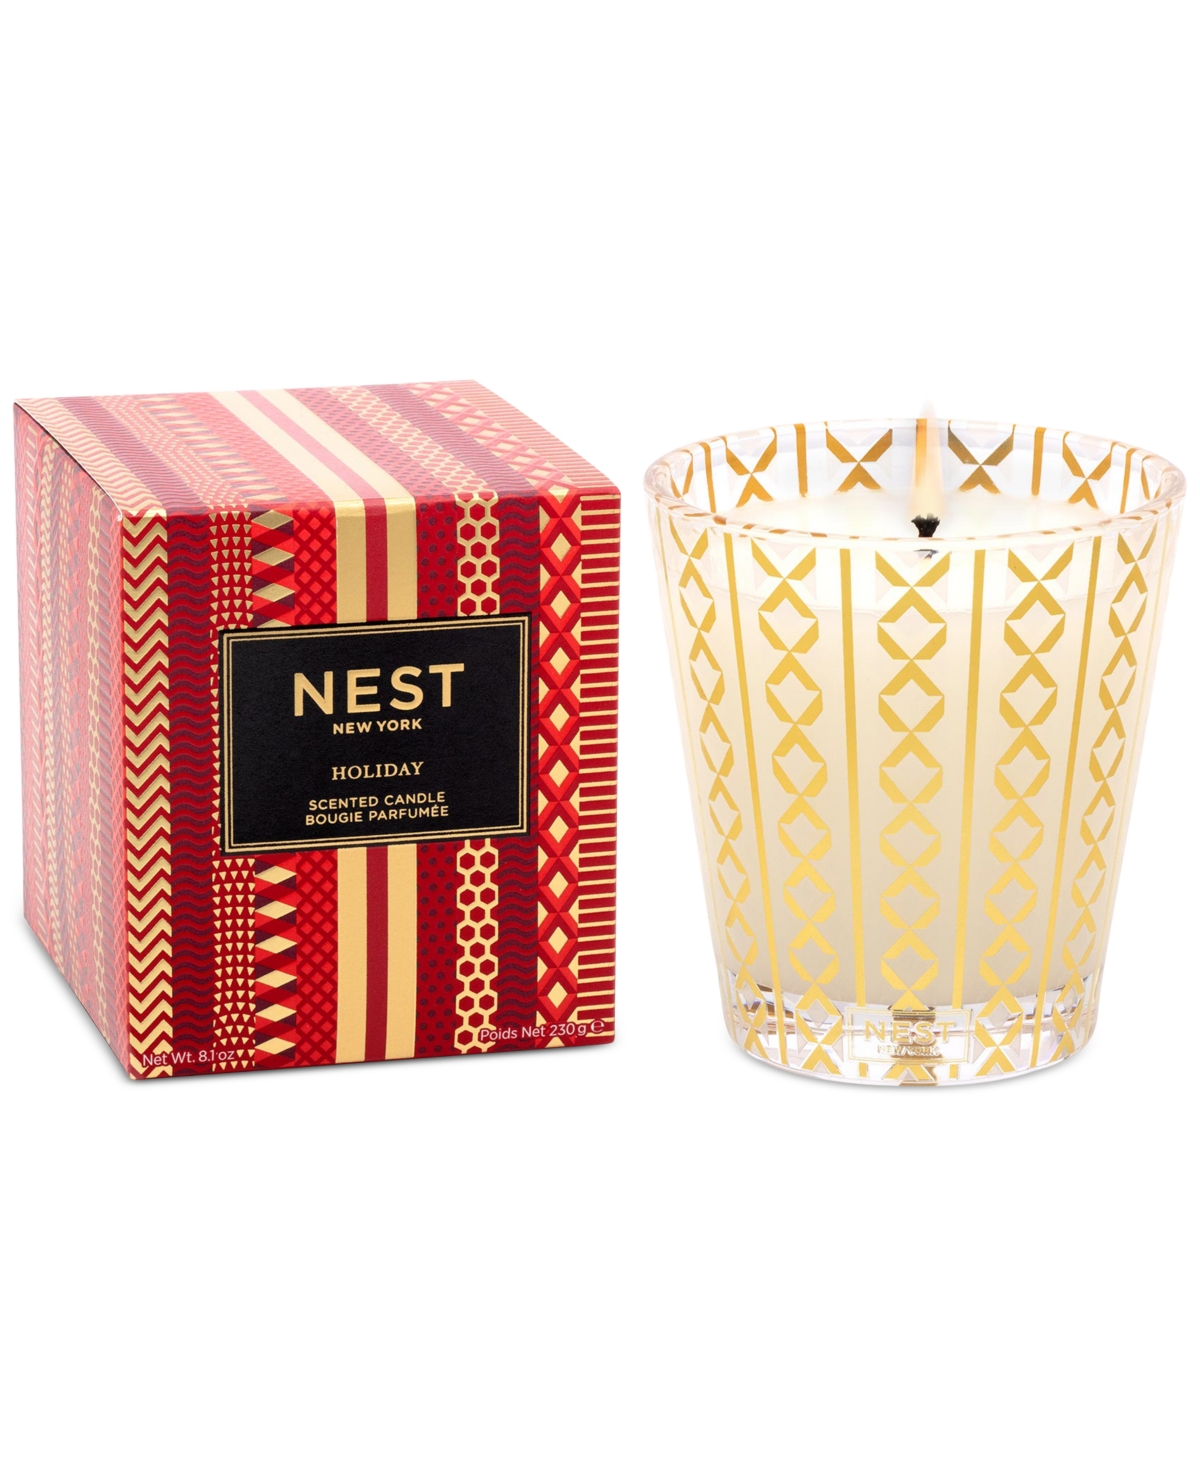 Holiday Classic Candle, 8.1 oz.